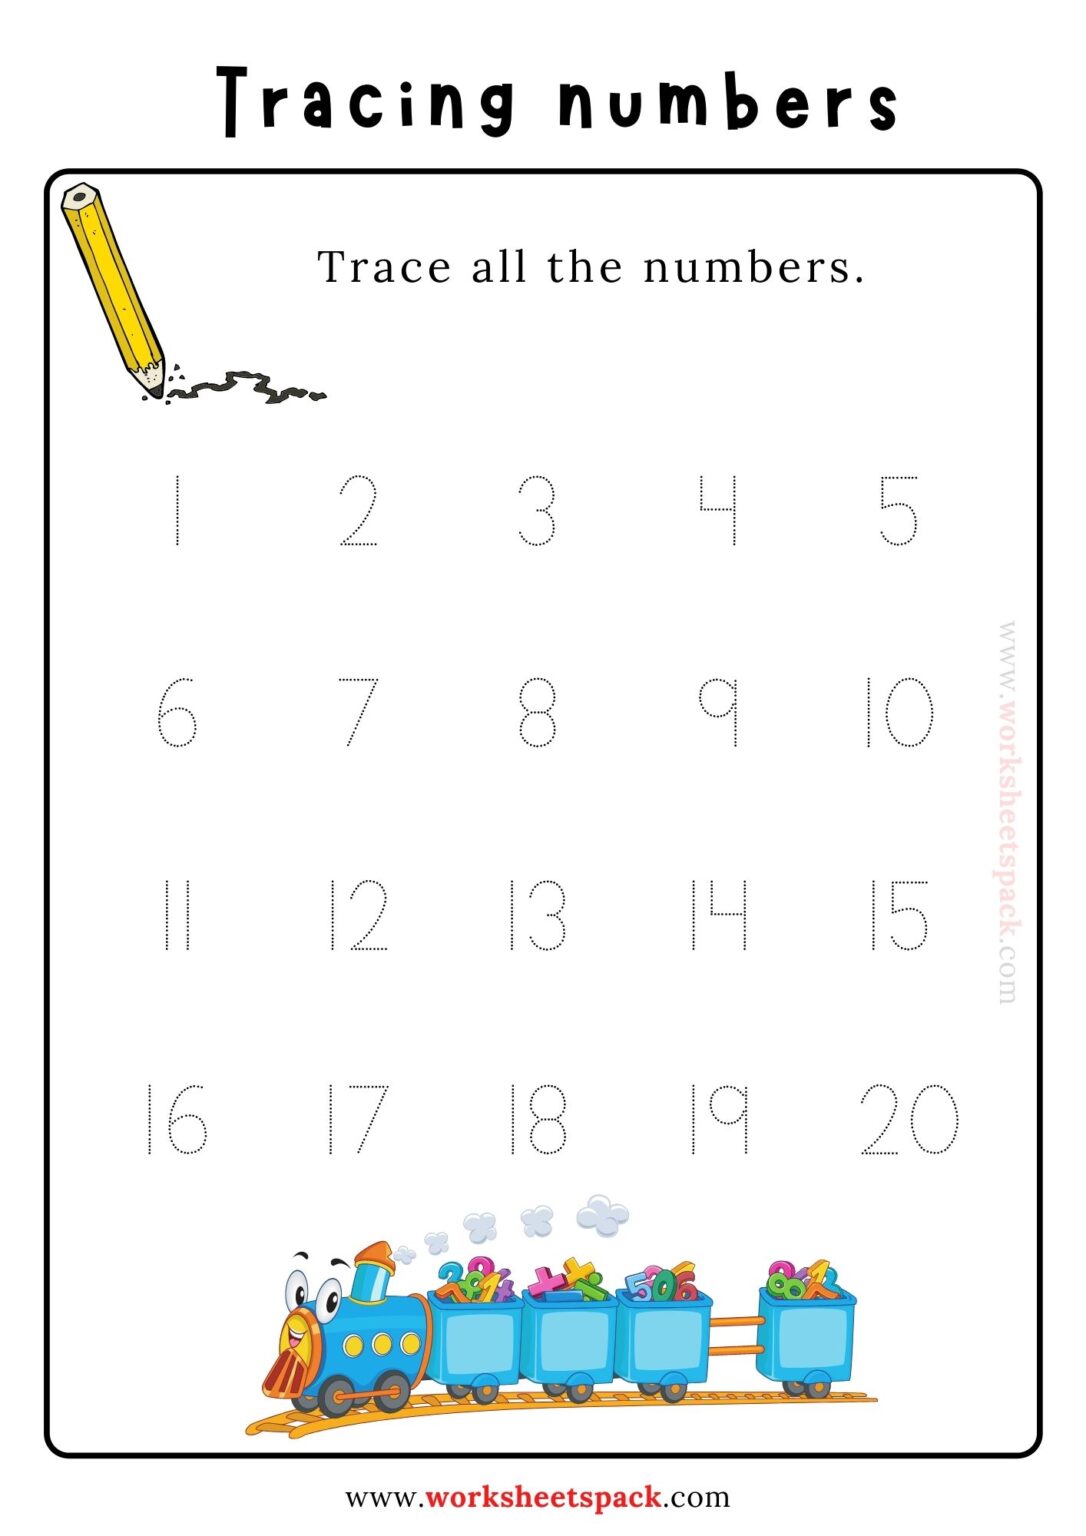 Get 65 Tracing Numbers Worksheets Ideas 62